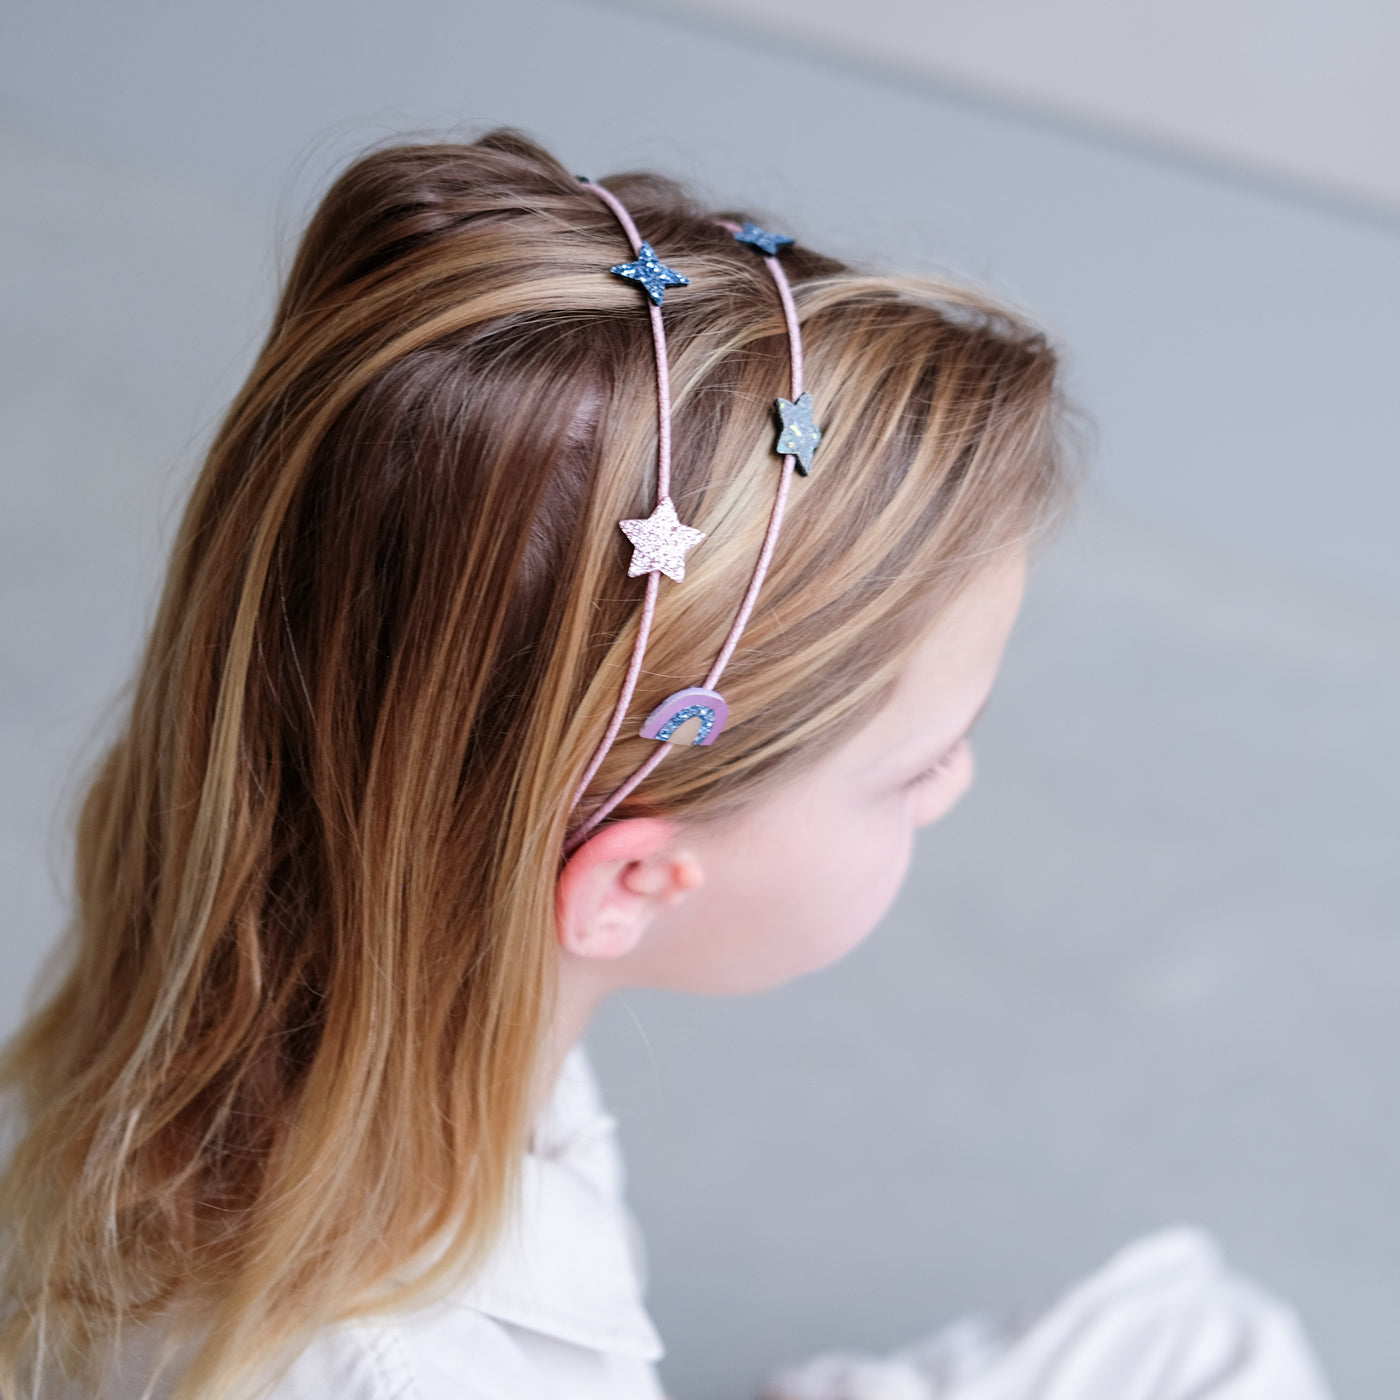 Blonde little girl wearing an Alice band featuring glitter stars and rainbows